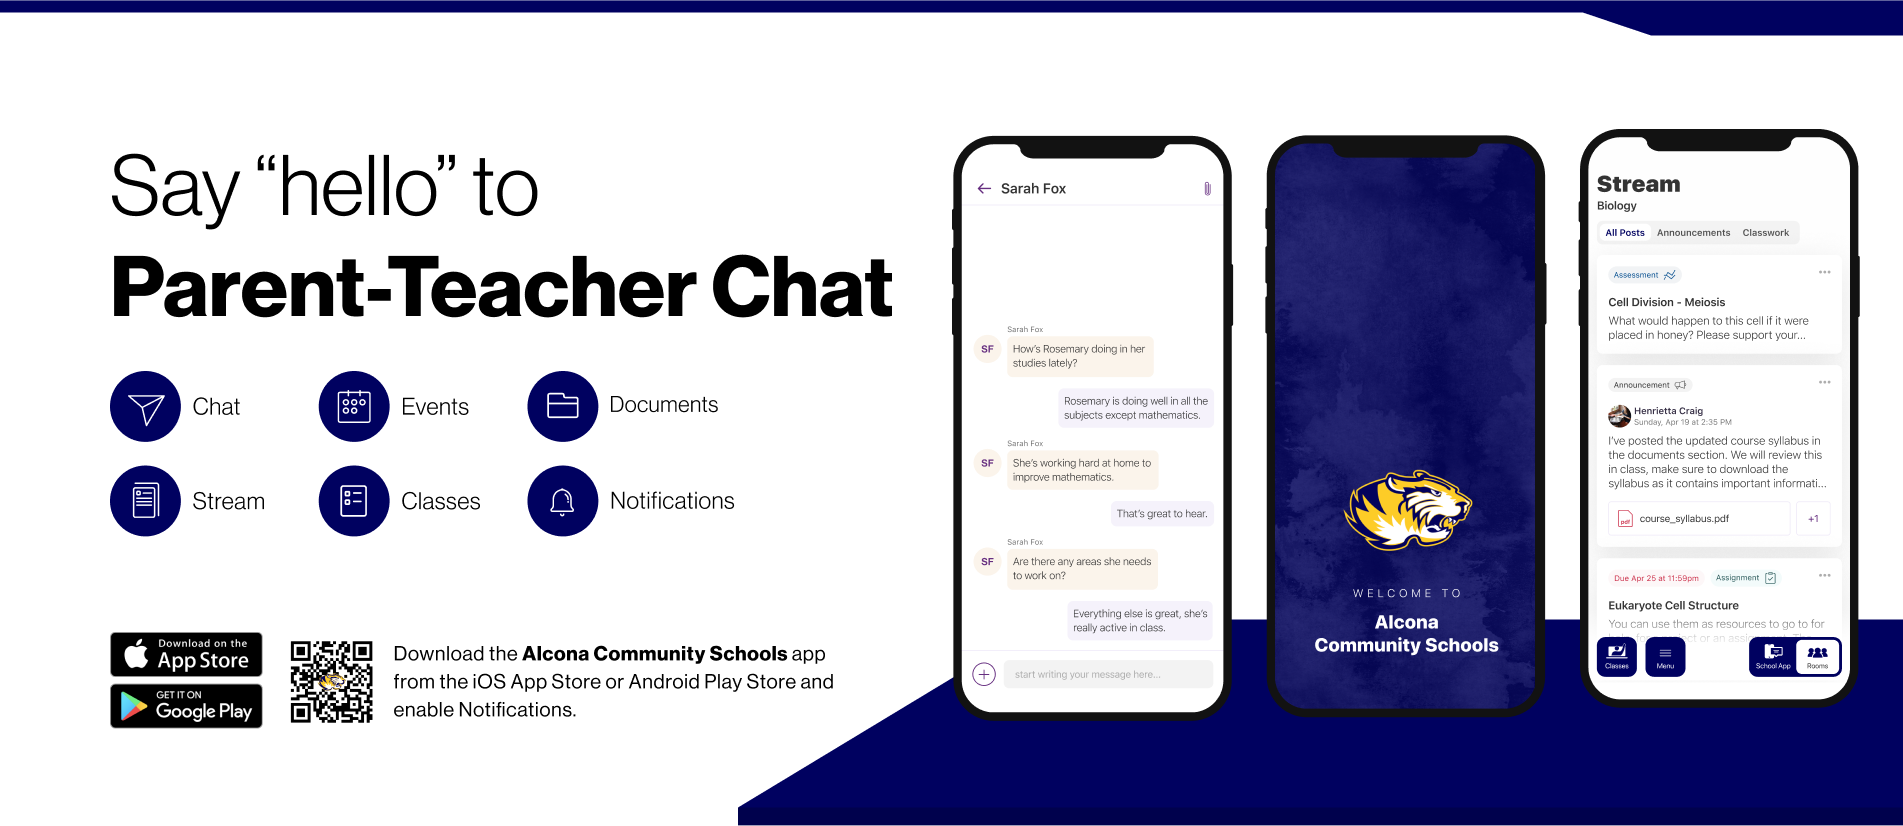 Say hello to Parent-Teacher chat in the new Rooms app. Download the Alcona Community Schools app in the Google Play or Apple App store.